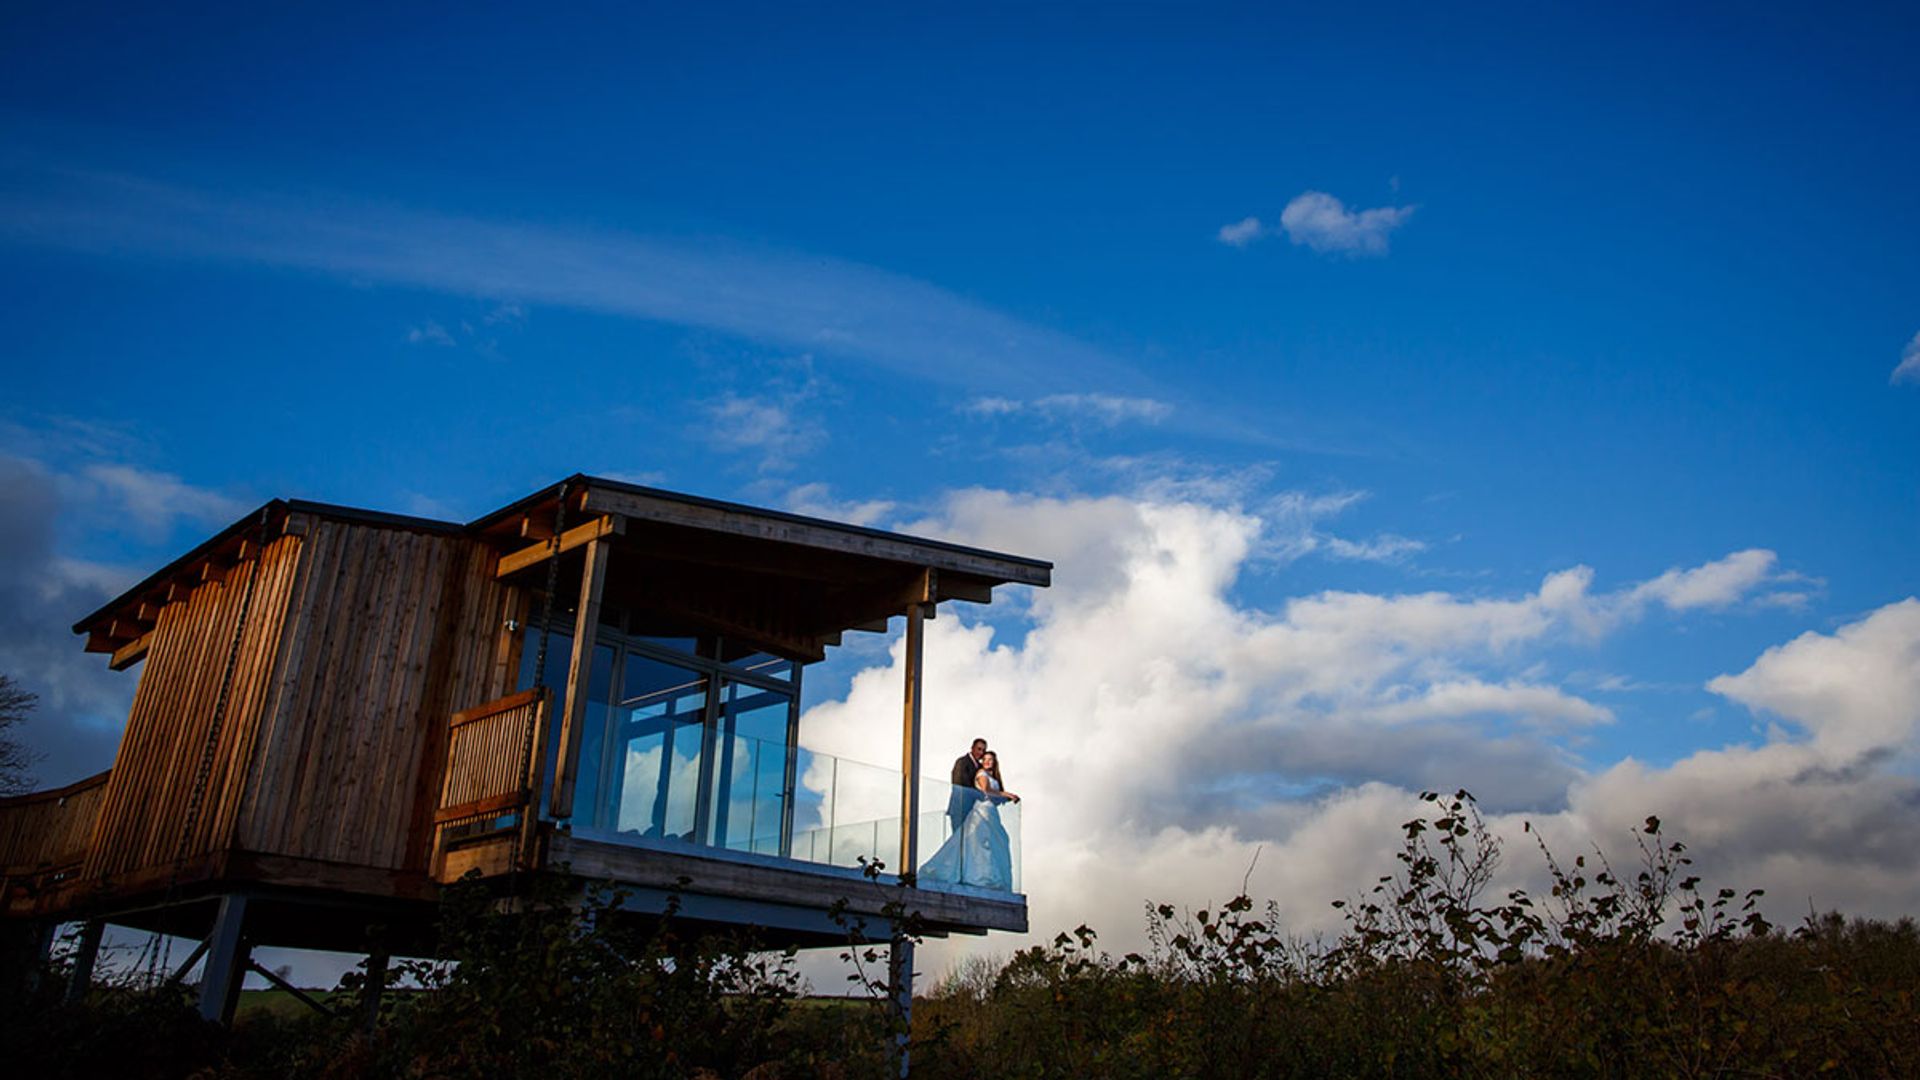 5 of the best intimate wedding venues in the UK for your post-lockdown wedding